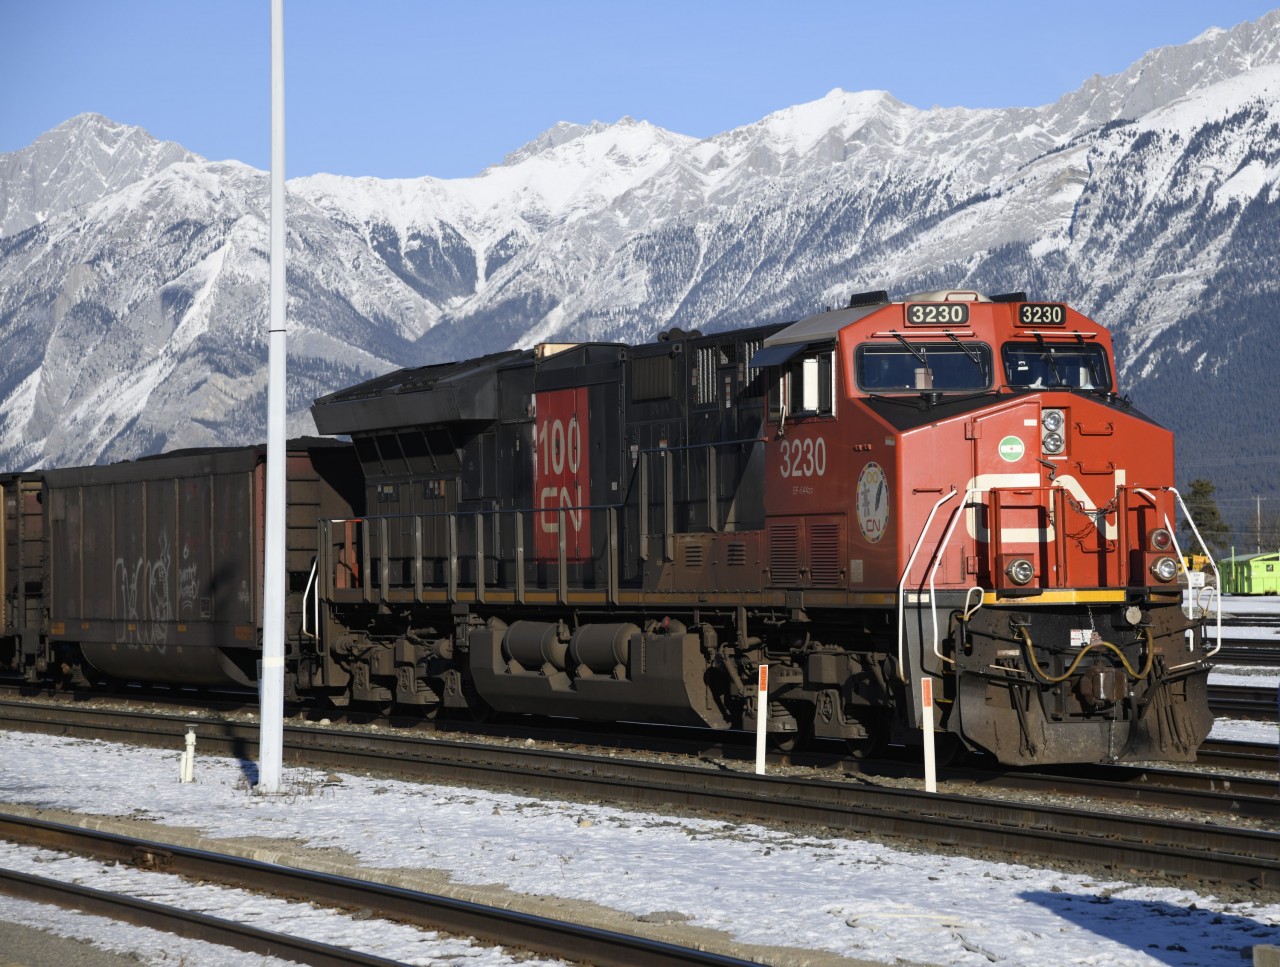 Waiting for a fresh crew  
Leading a loaded coal train, CN 3230 EF-644zc sits in front of the VIA station in Jasper, AB November 26, 2023 waiting for a new crew to continue the journey west.